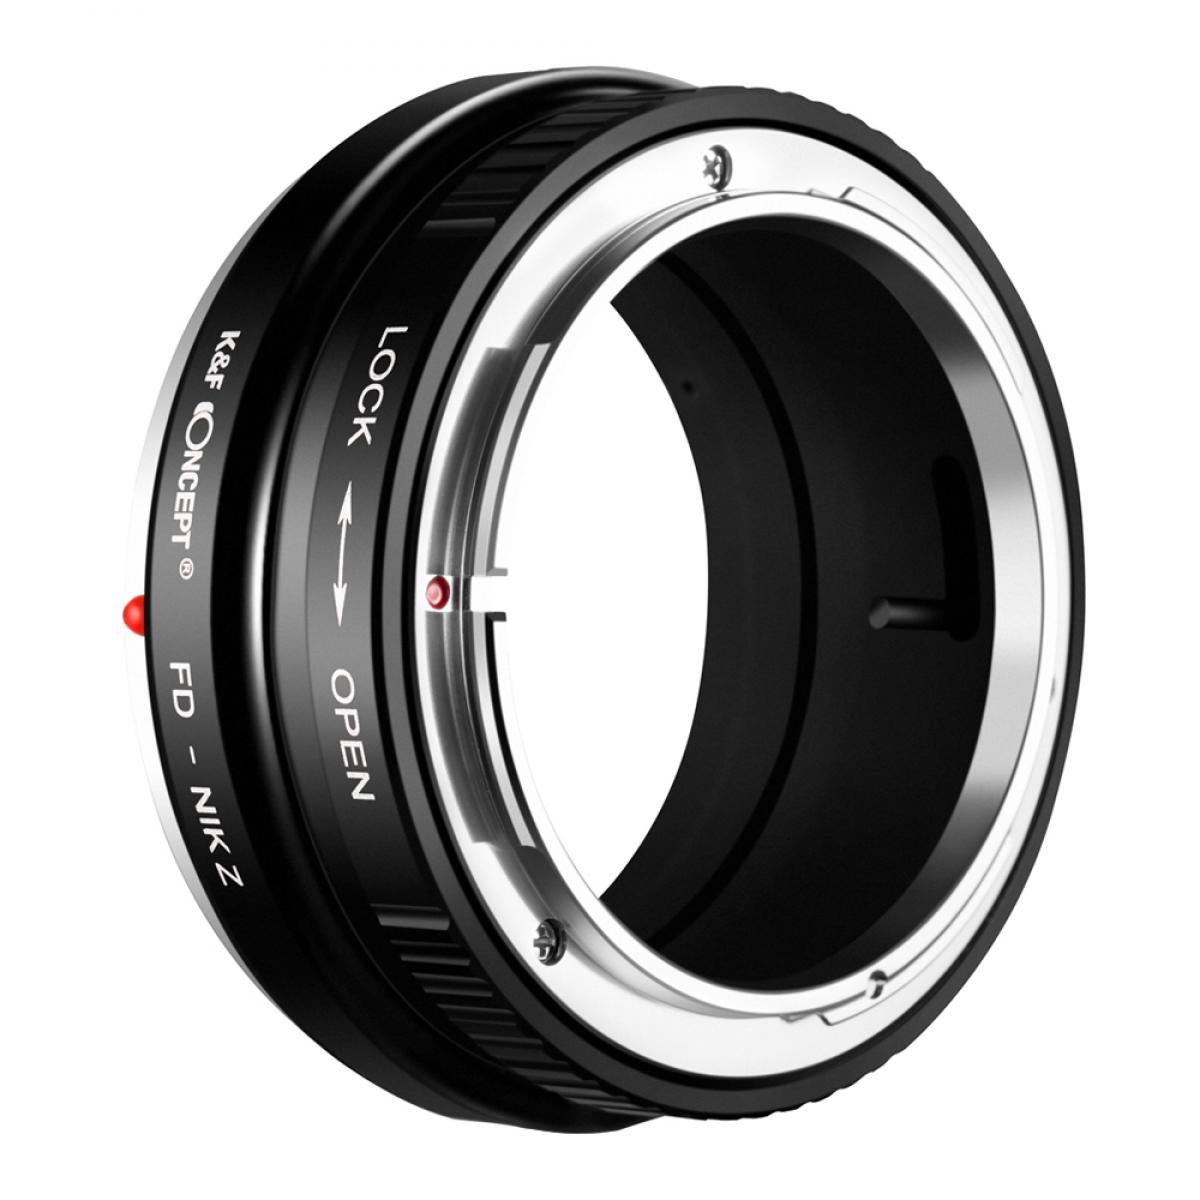 Pixco Lens Adapter for Canon FD Mount Lens to Nikon Z Mount Camera Adapter Ring Nikon Z6 Nikon Z7 Support Focus Infinity Lens Adapter FD-Nikon Z